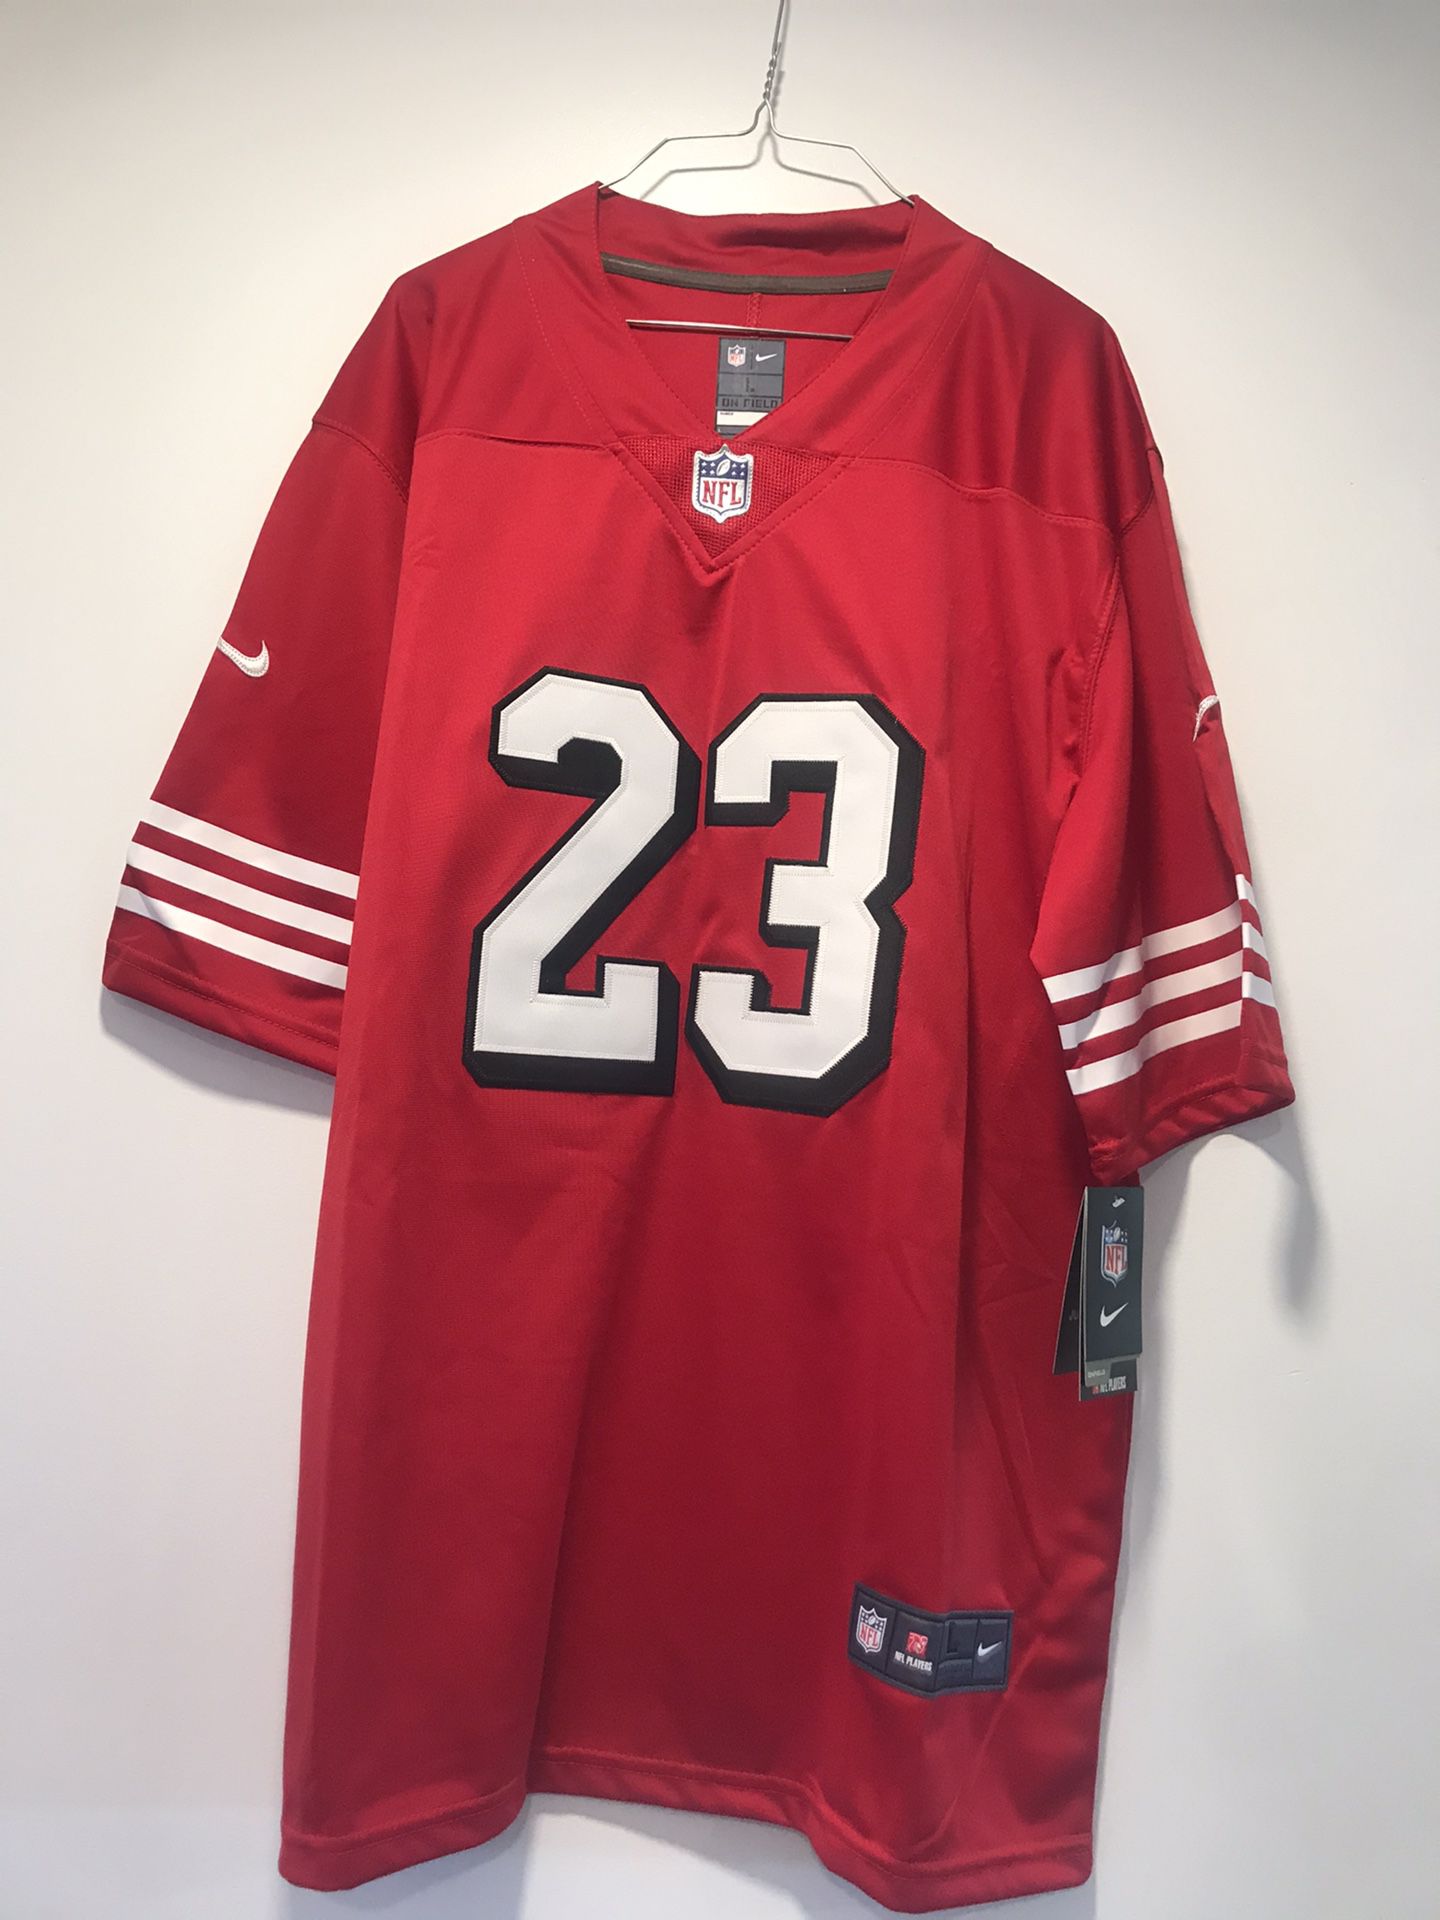 22/23 SF Niners Jersey #23 Large for Sale in Richmond, CA - OfferUp